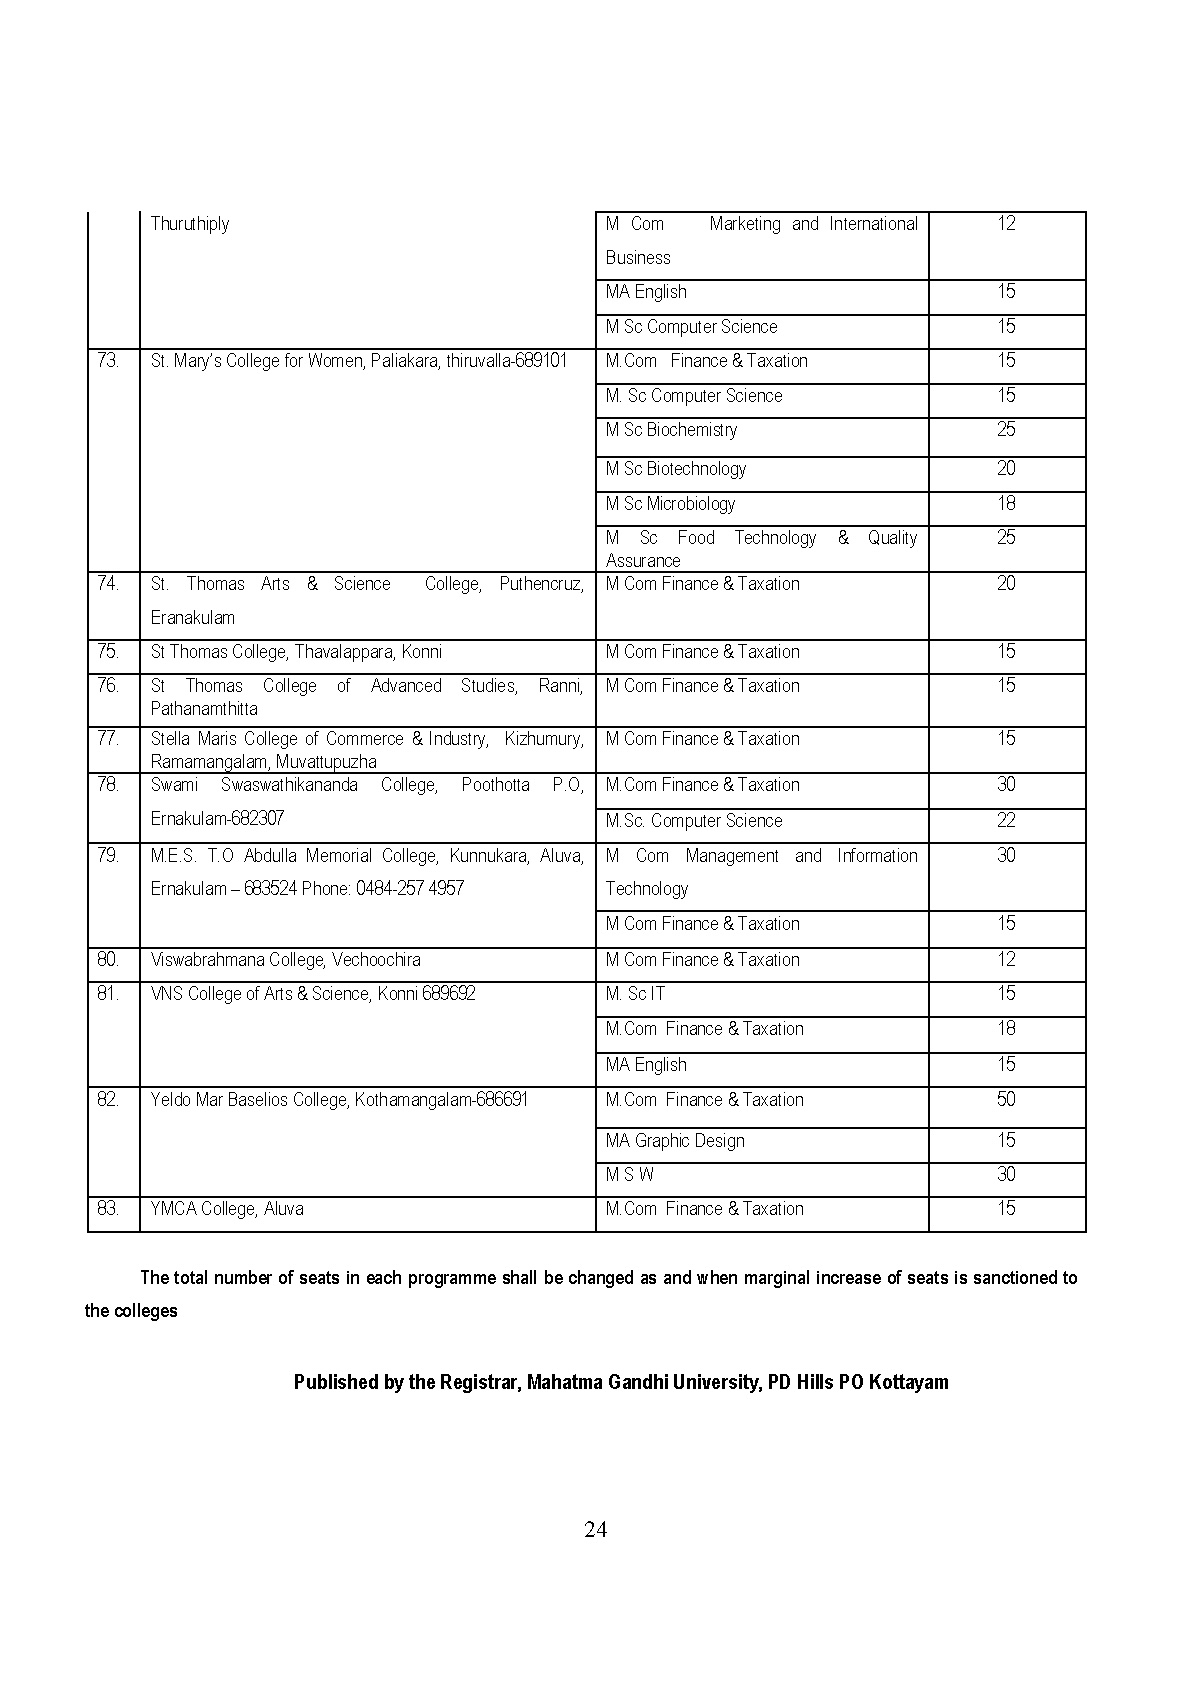 List of Unaided Arts and Science Colleges of MG University 2019 - Notification Image 7